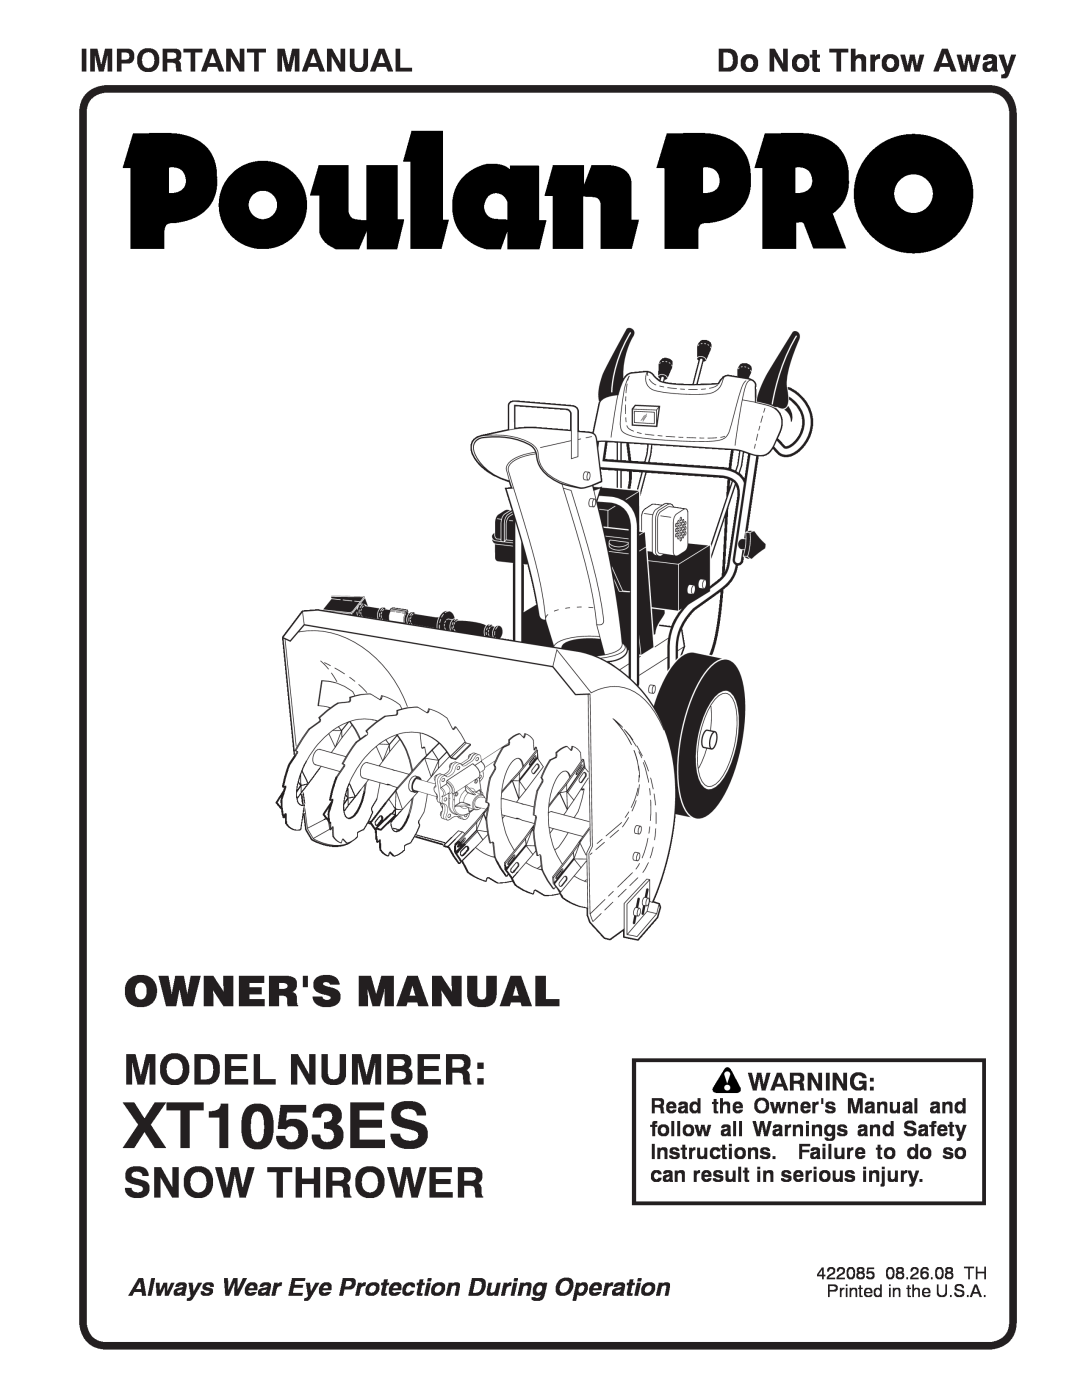 Poulan 422085 owner manual Owners Manual Model Number, Snow Thrower, Important Manual, XT1053ES, Do Not Throw Away 